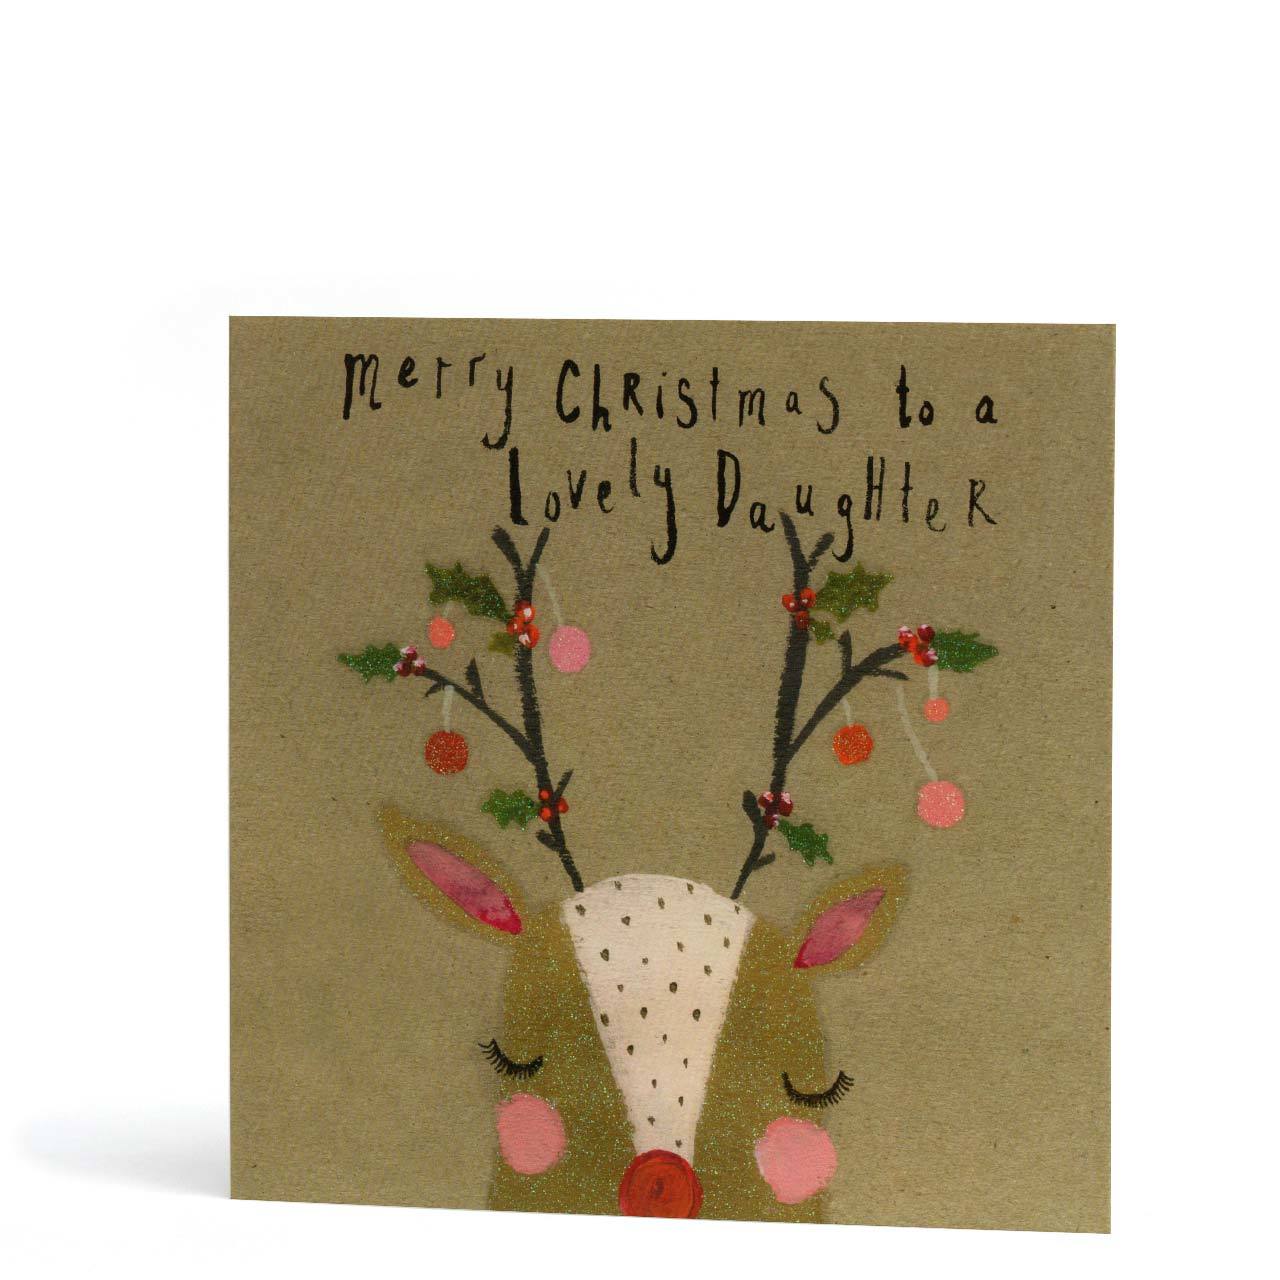 Merry Christmas Lovely Daughter Greeting Card